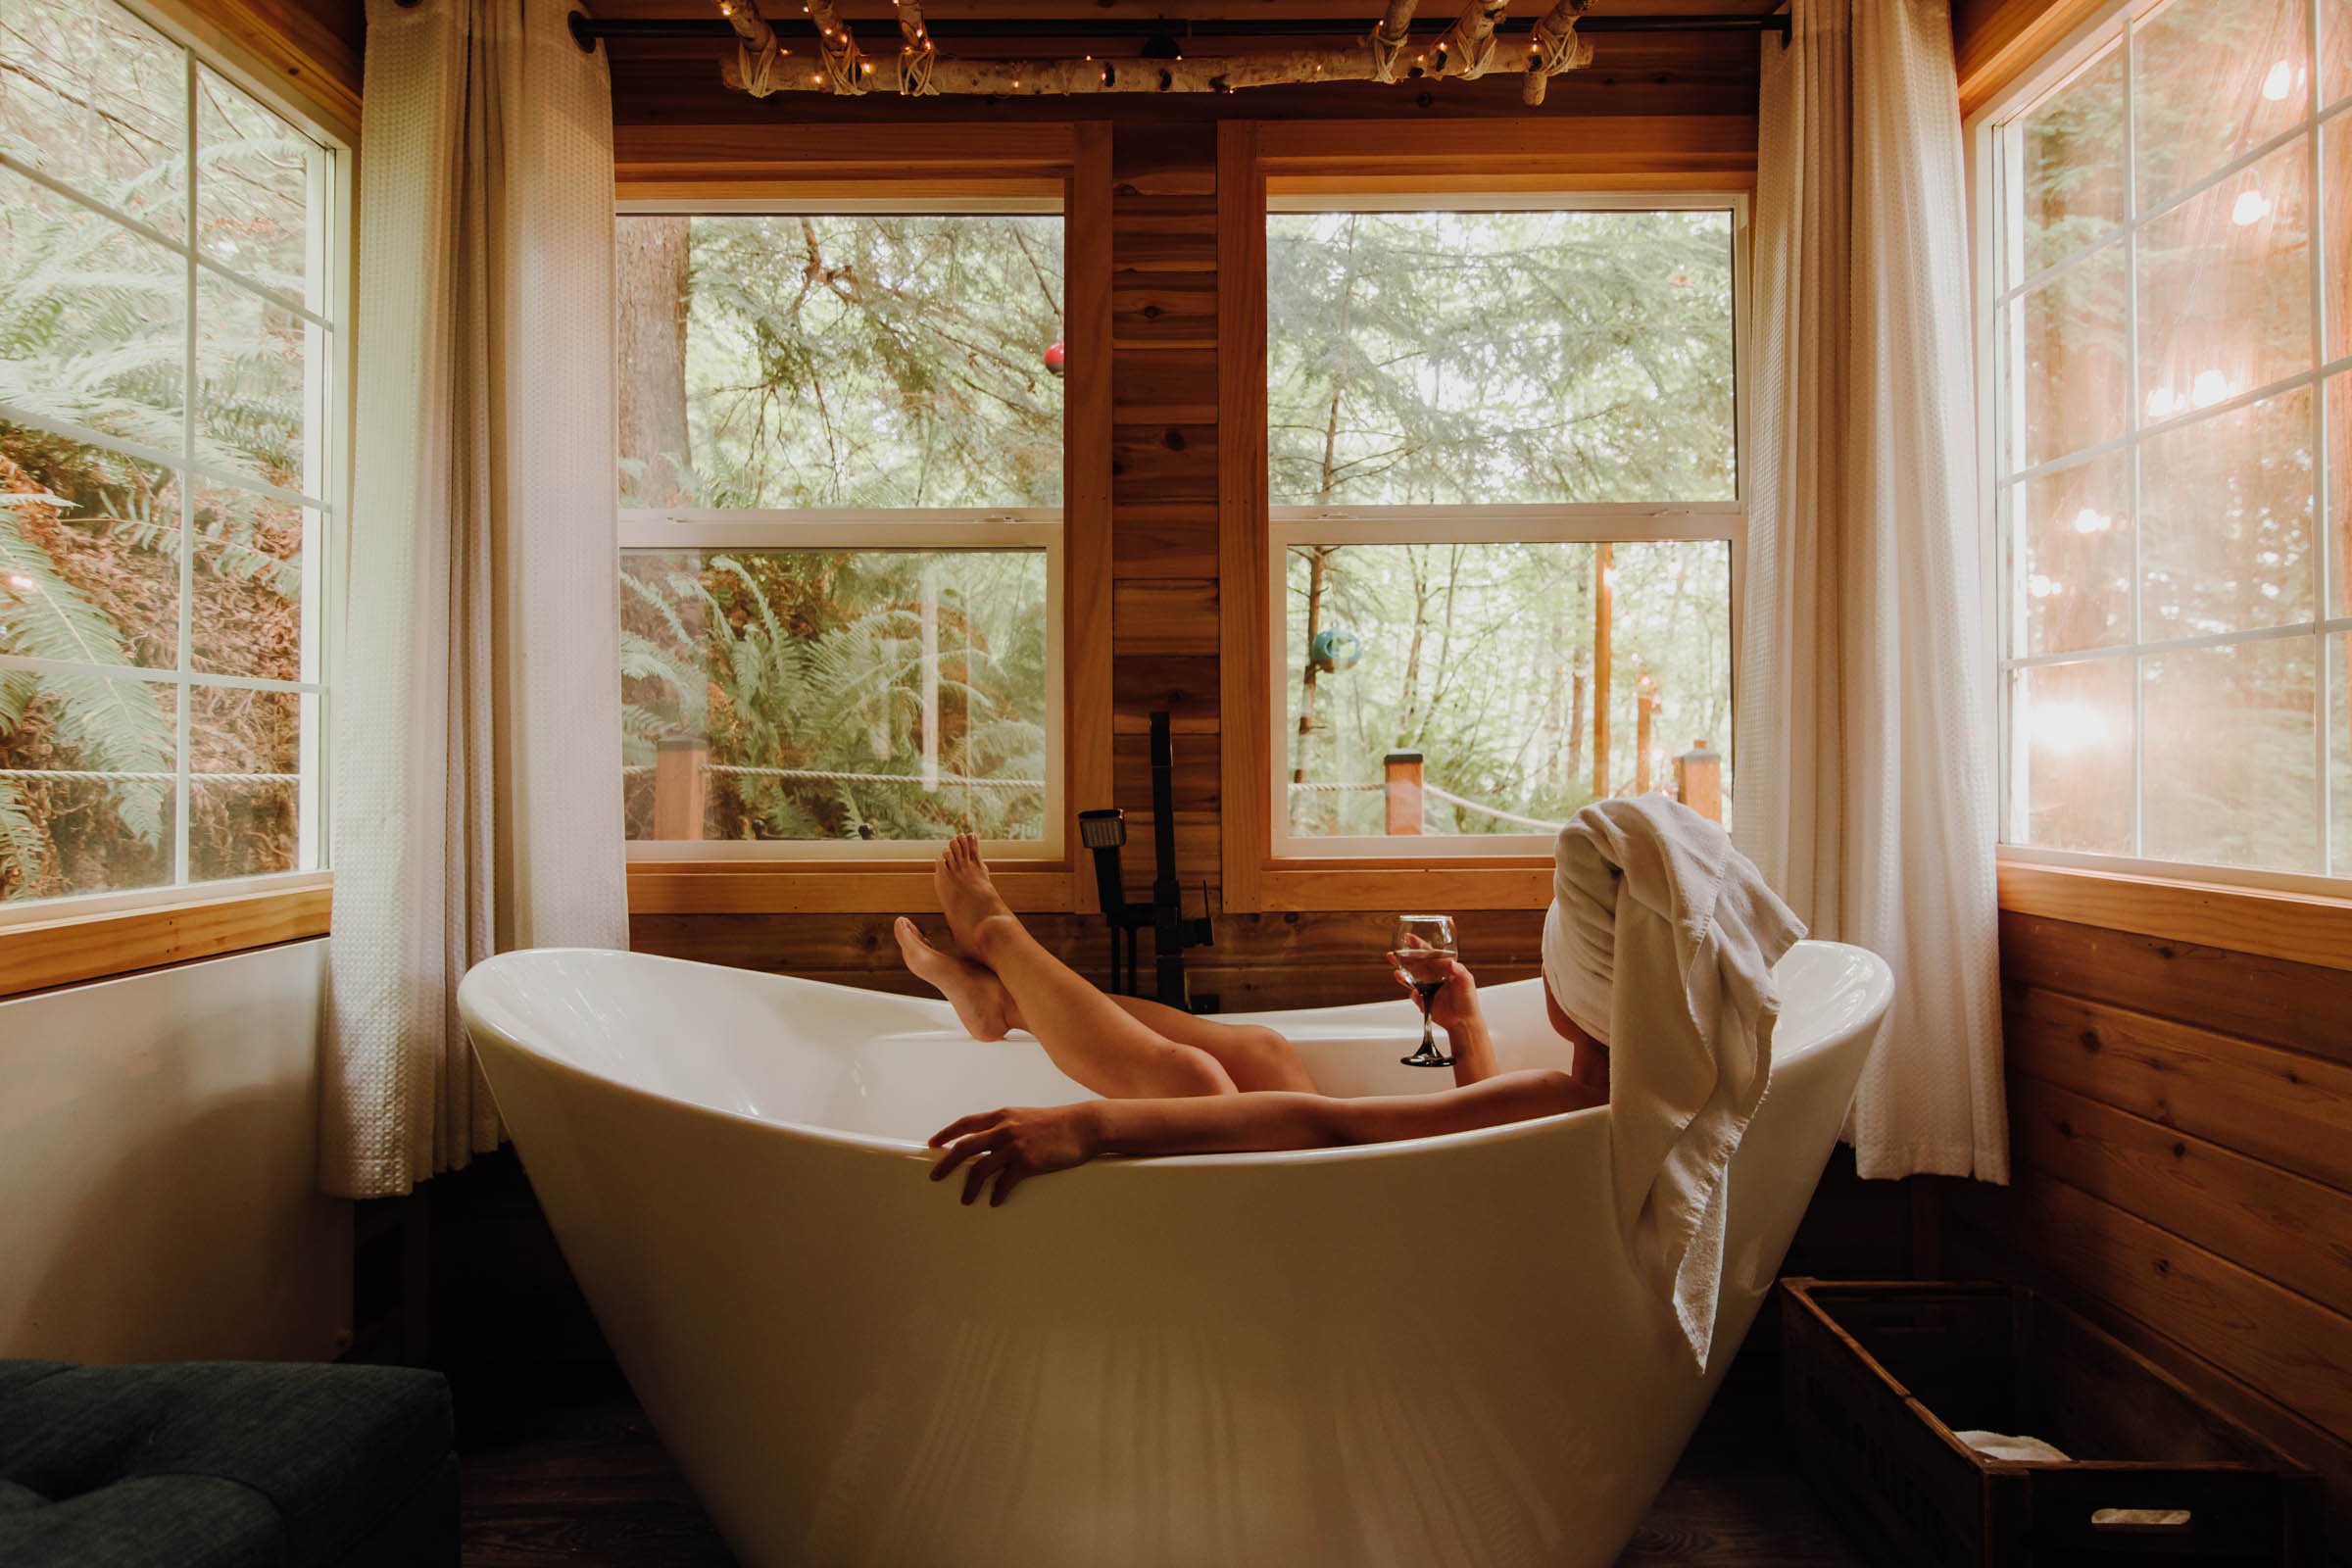 Soaking tub at the Sasquatch Cabin, Treehouse Place at Deer Ridge